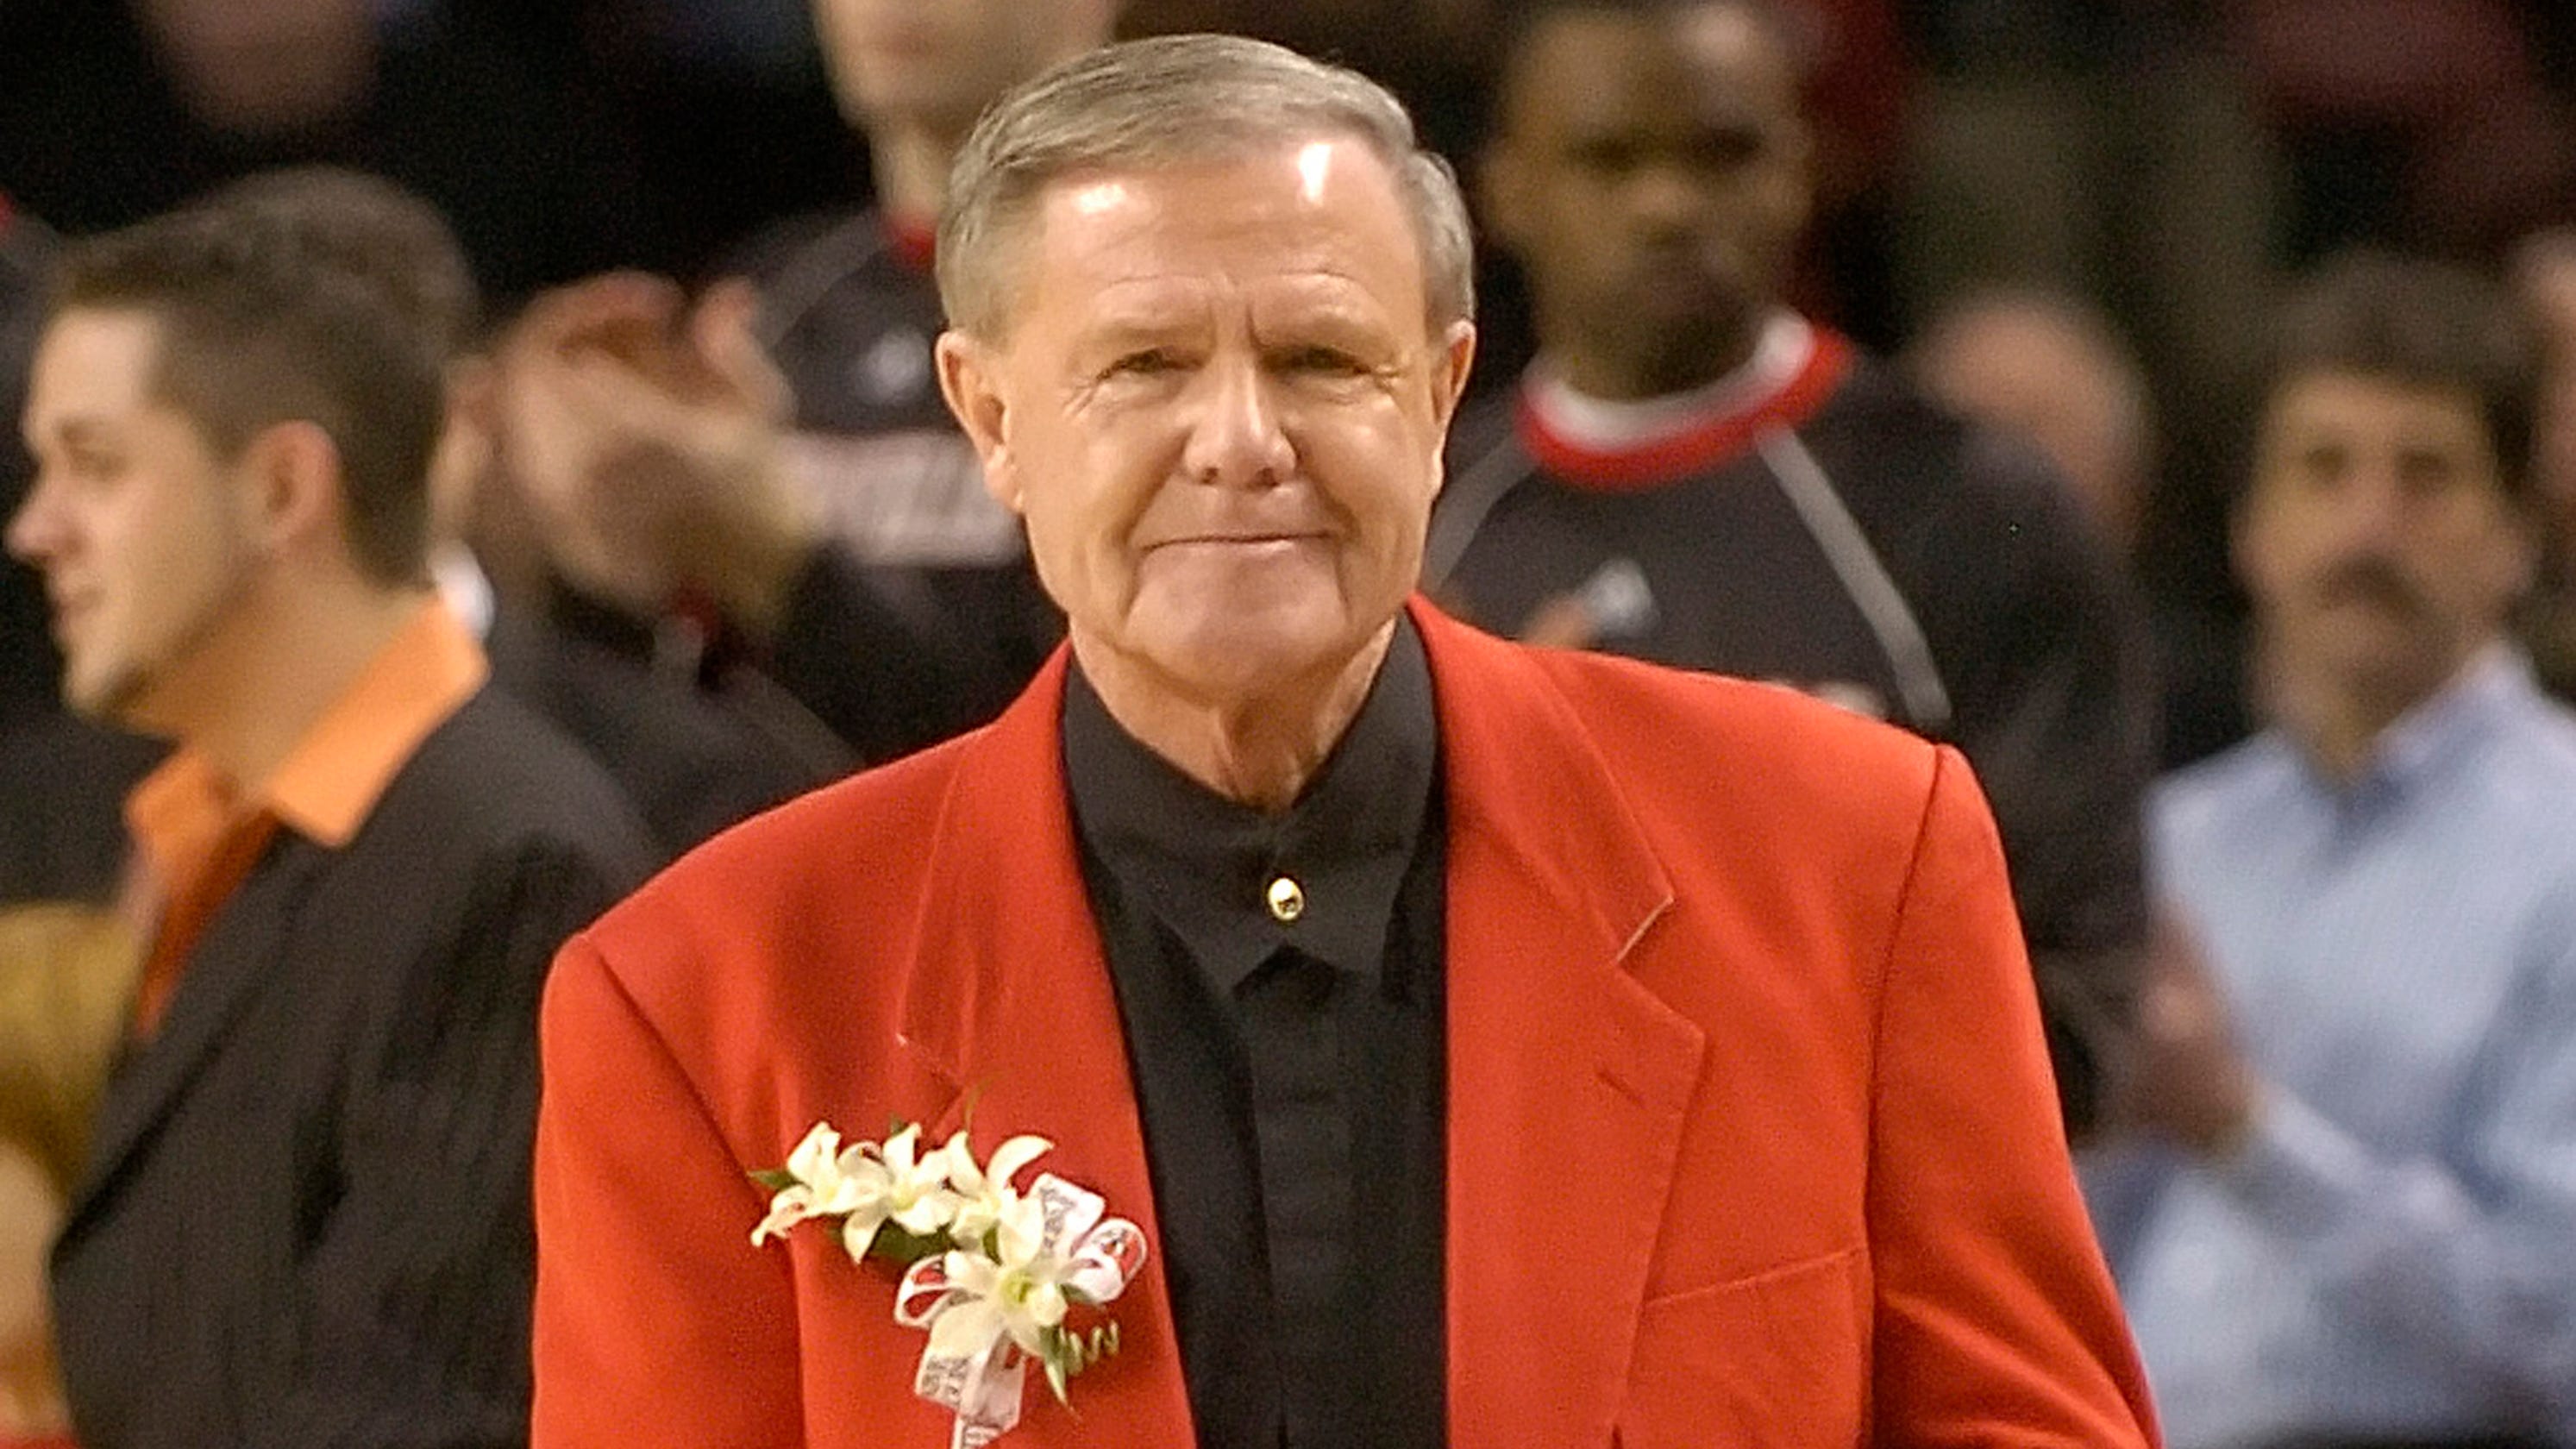 Denny Crum, former Louisville basketball coach, recovering after stroke